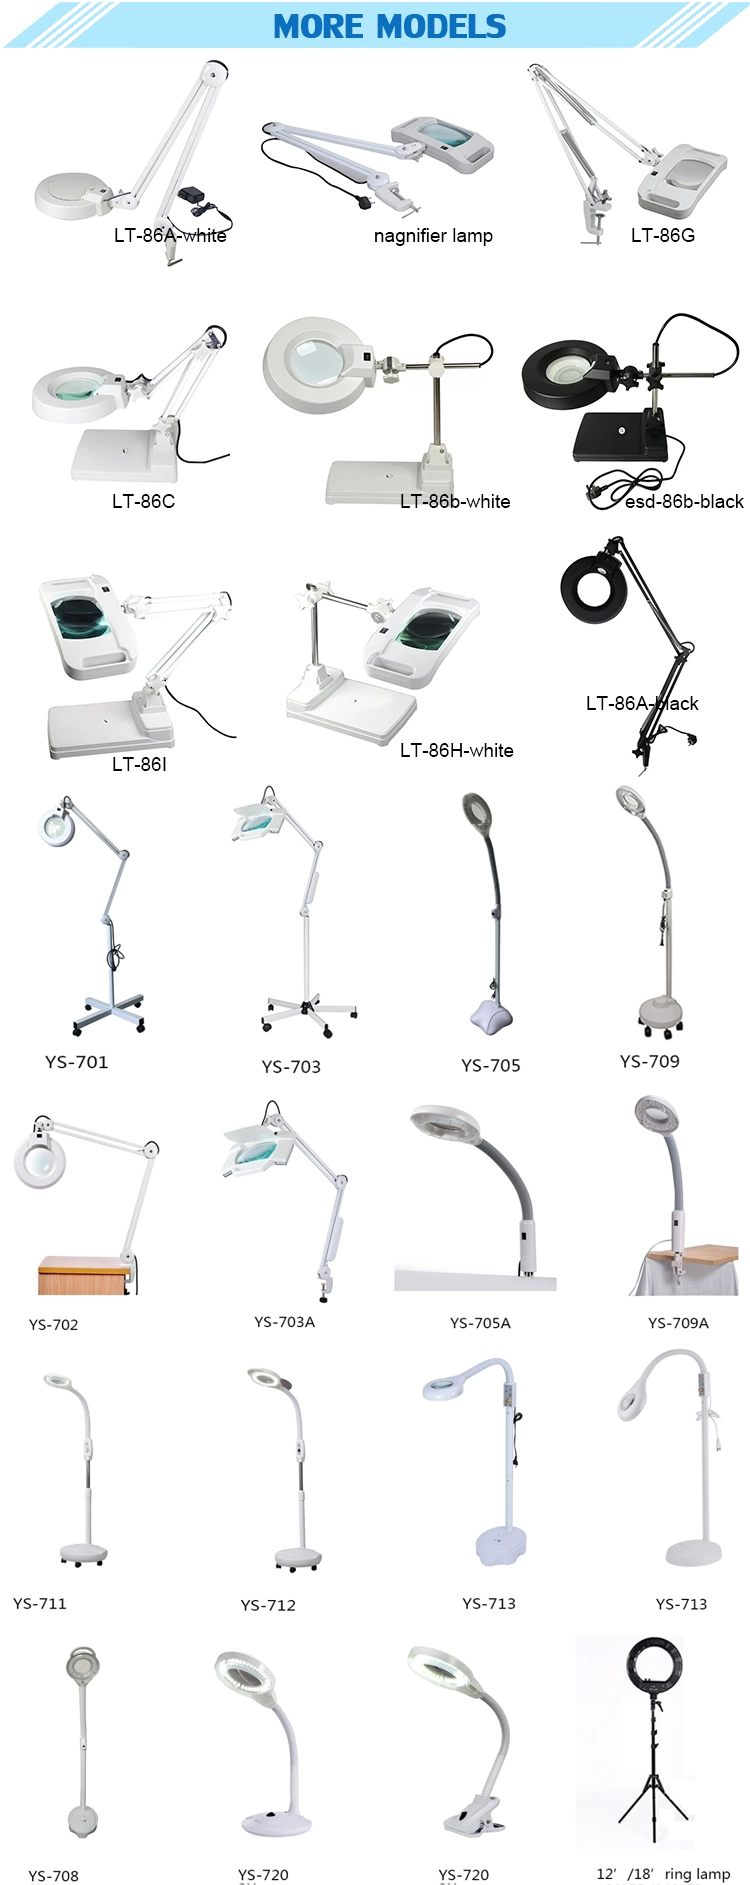 High Quality Workshops Beauty Salon Magnifying Lamp Desk Clamp Illuminated Magnifier LED Magnifier Lamp